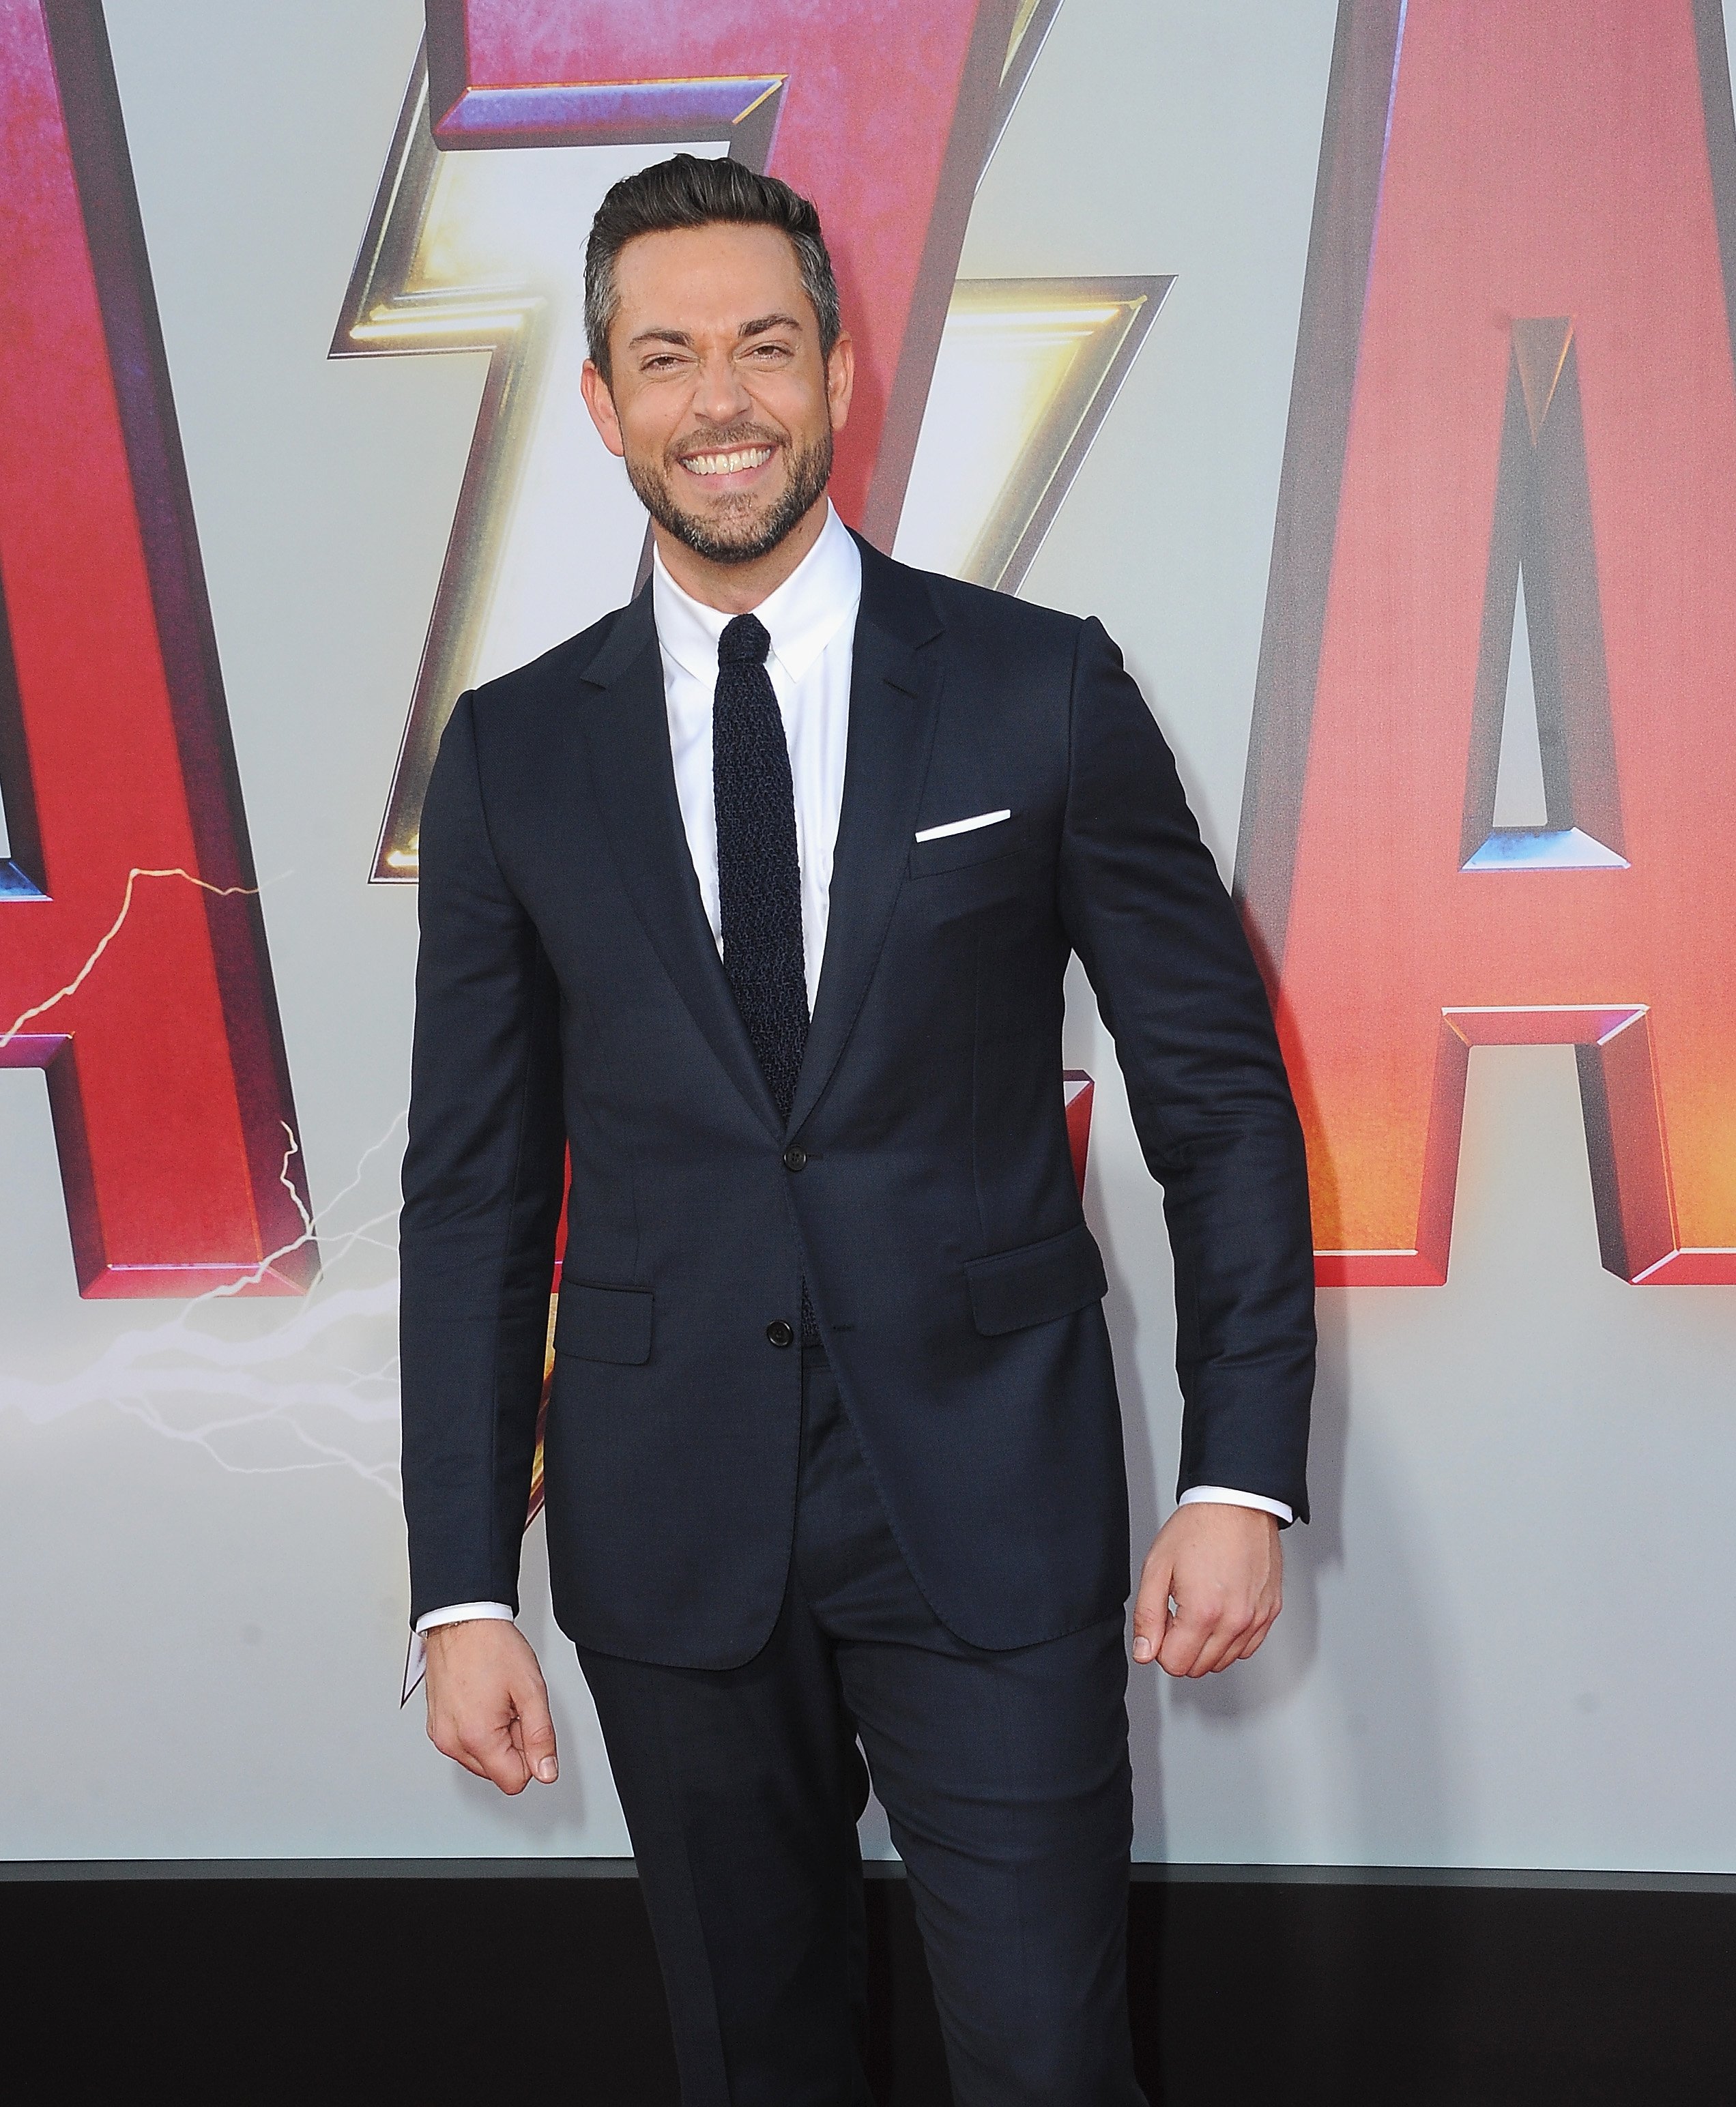 Zachary Levi arrives for the Warner Bros. Pictures And New Line Cinema's World Premiere Of "SHAZAM!" on March 28, 2019, in Hollywood, California. | Source: Getty Images